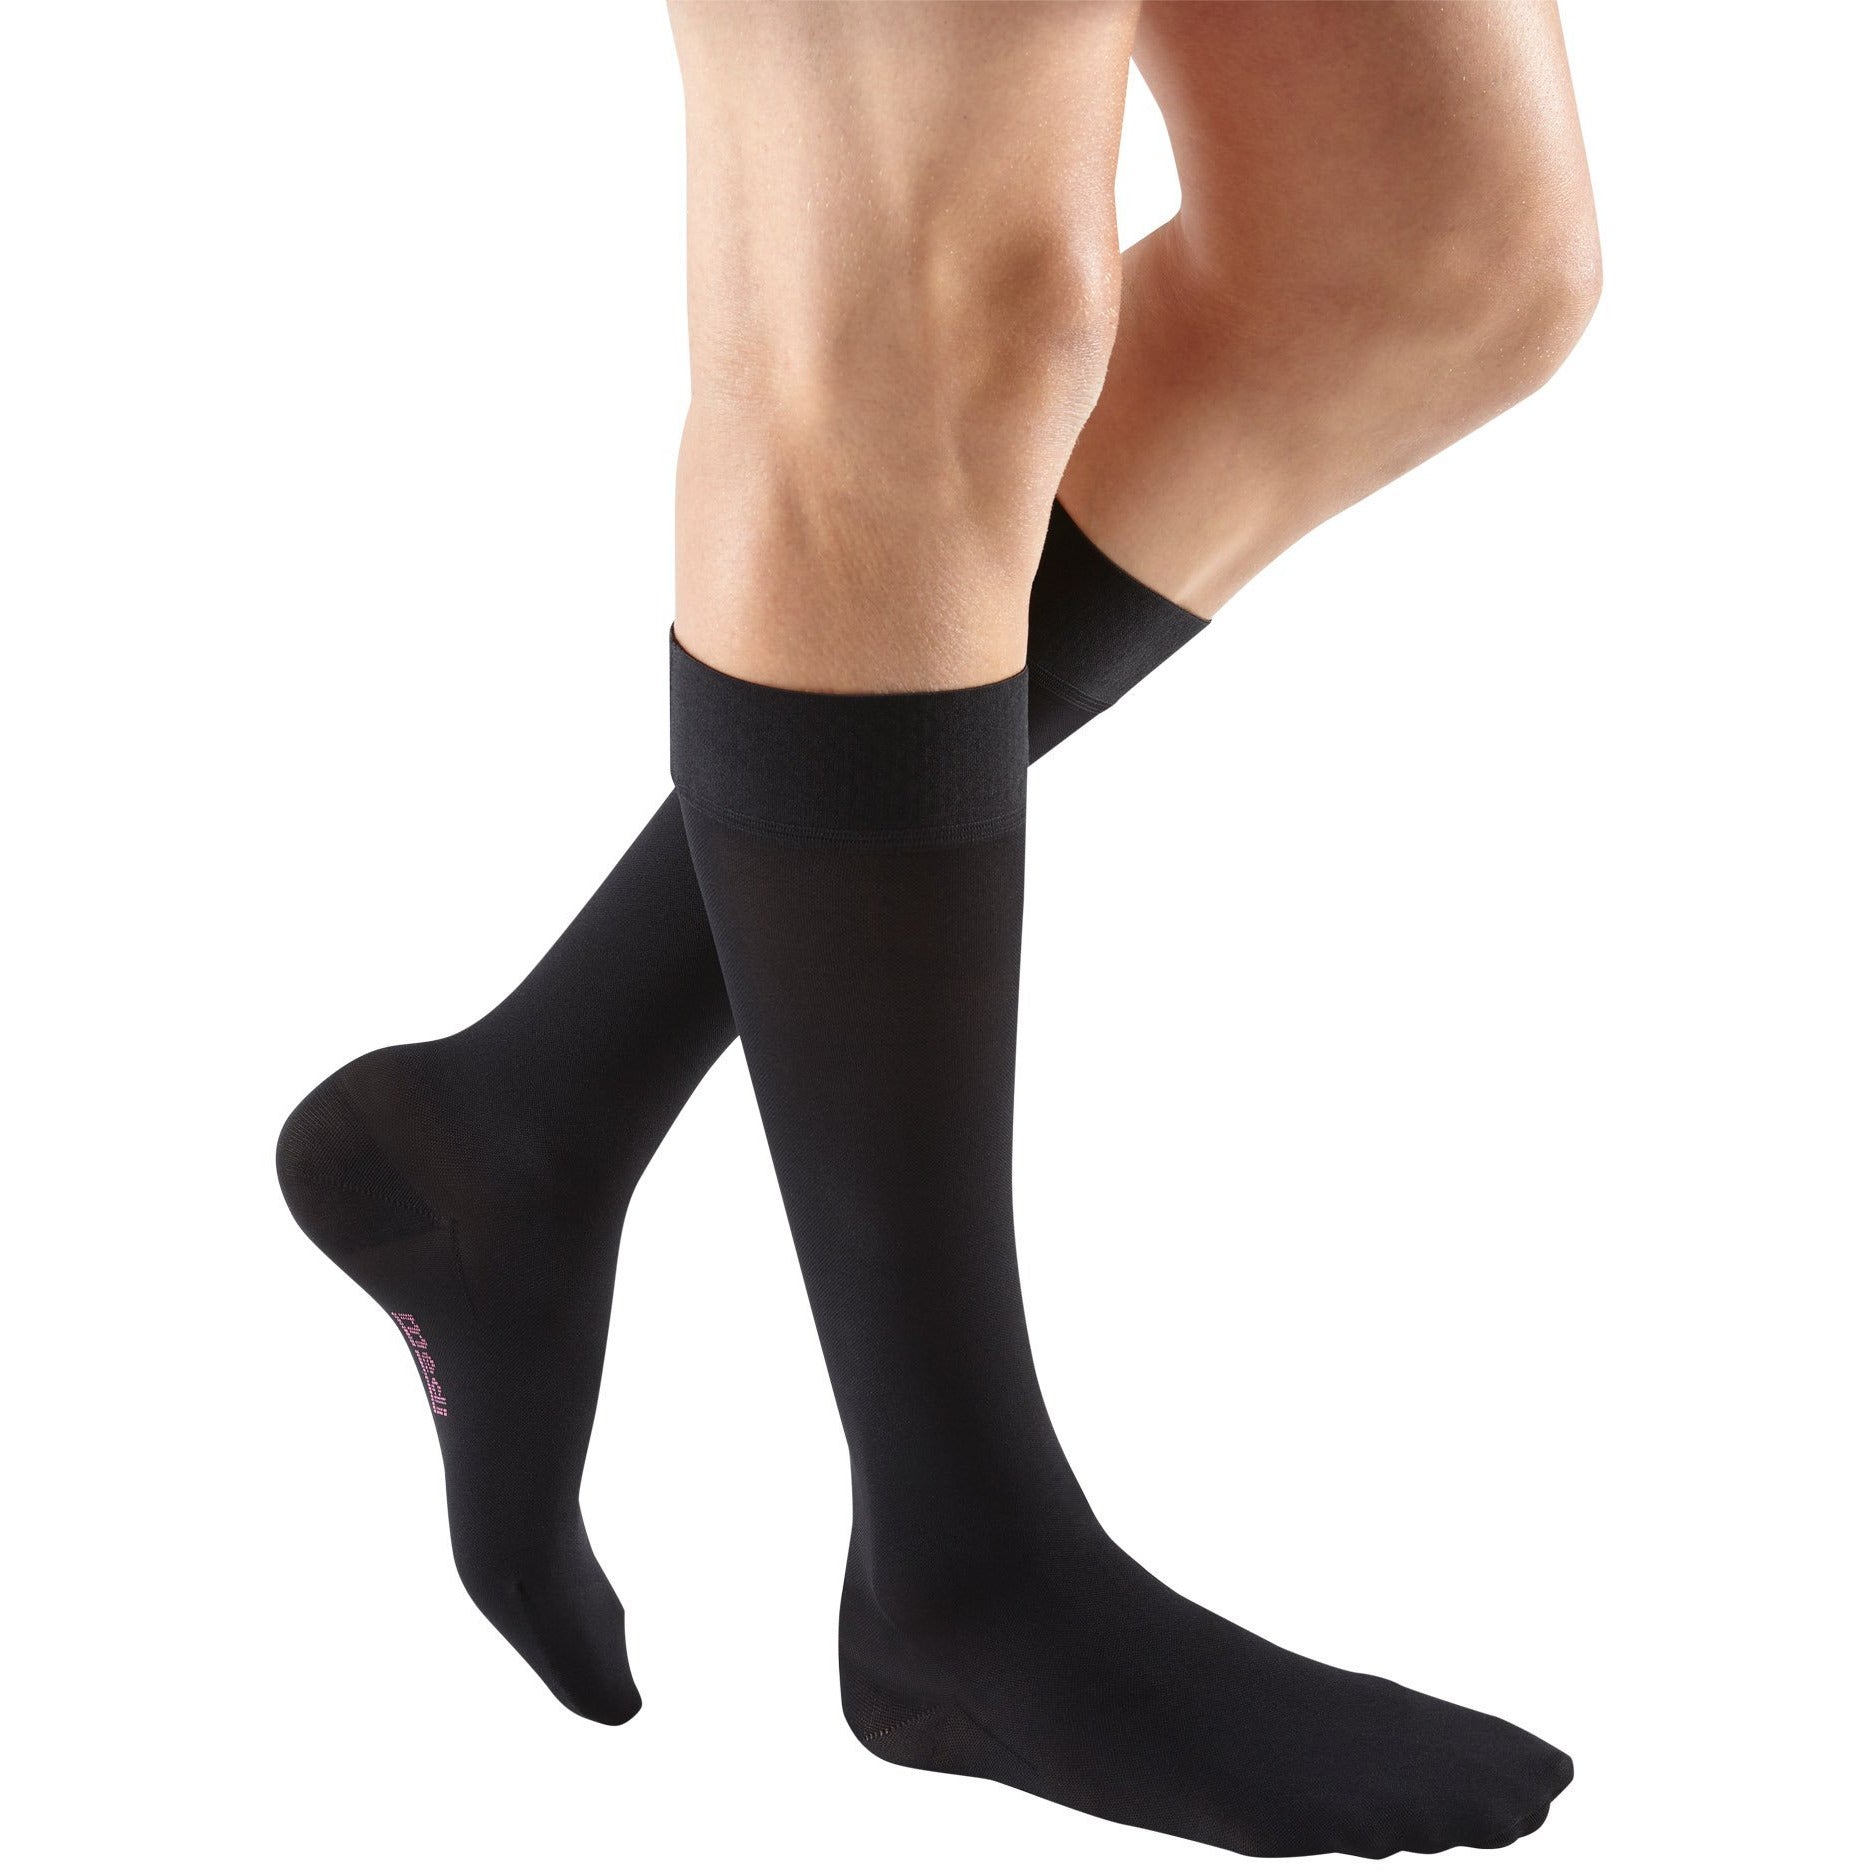 Mediven Plus 20-30 mmHg Knee High w/ Silicone Top Band, Black